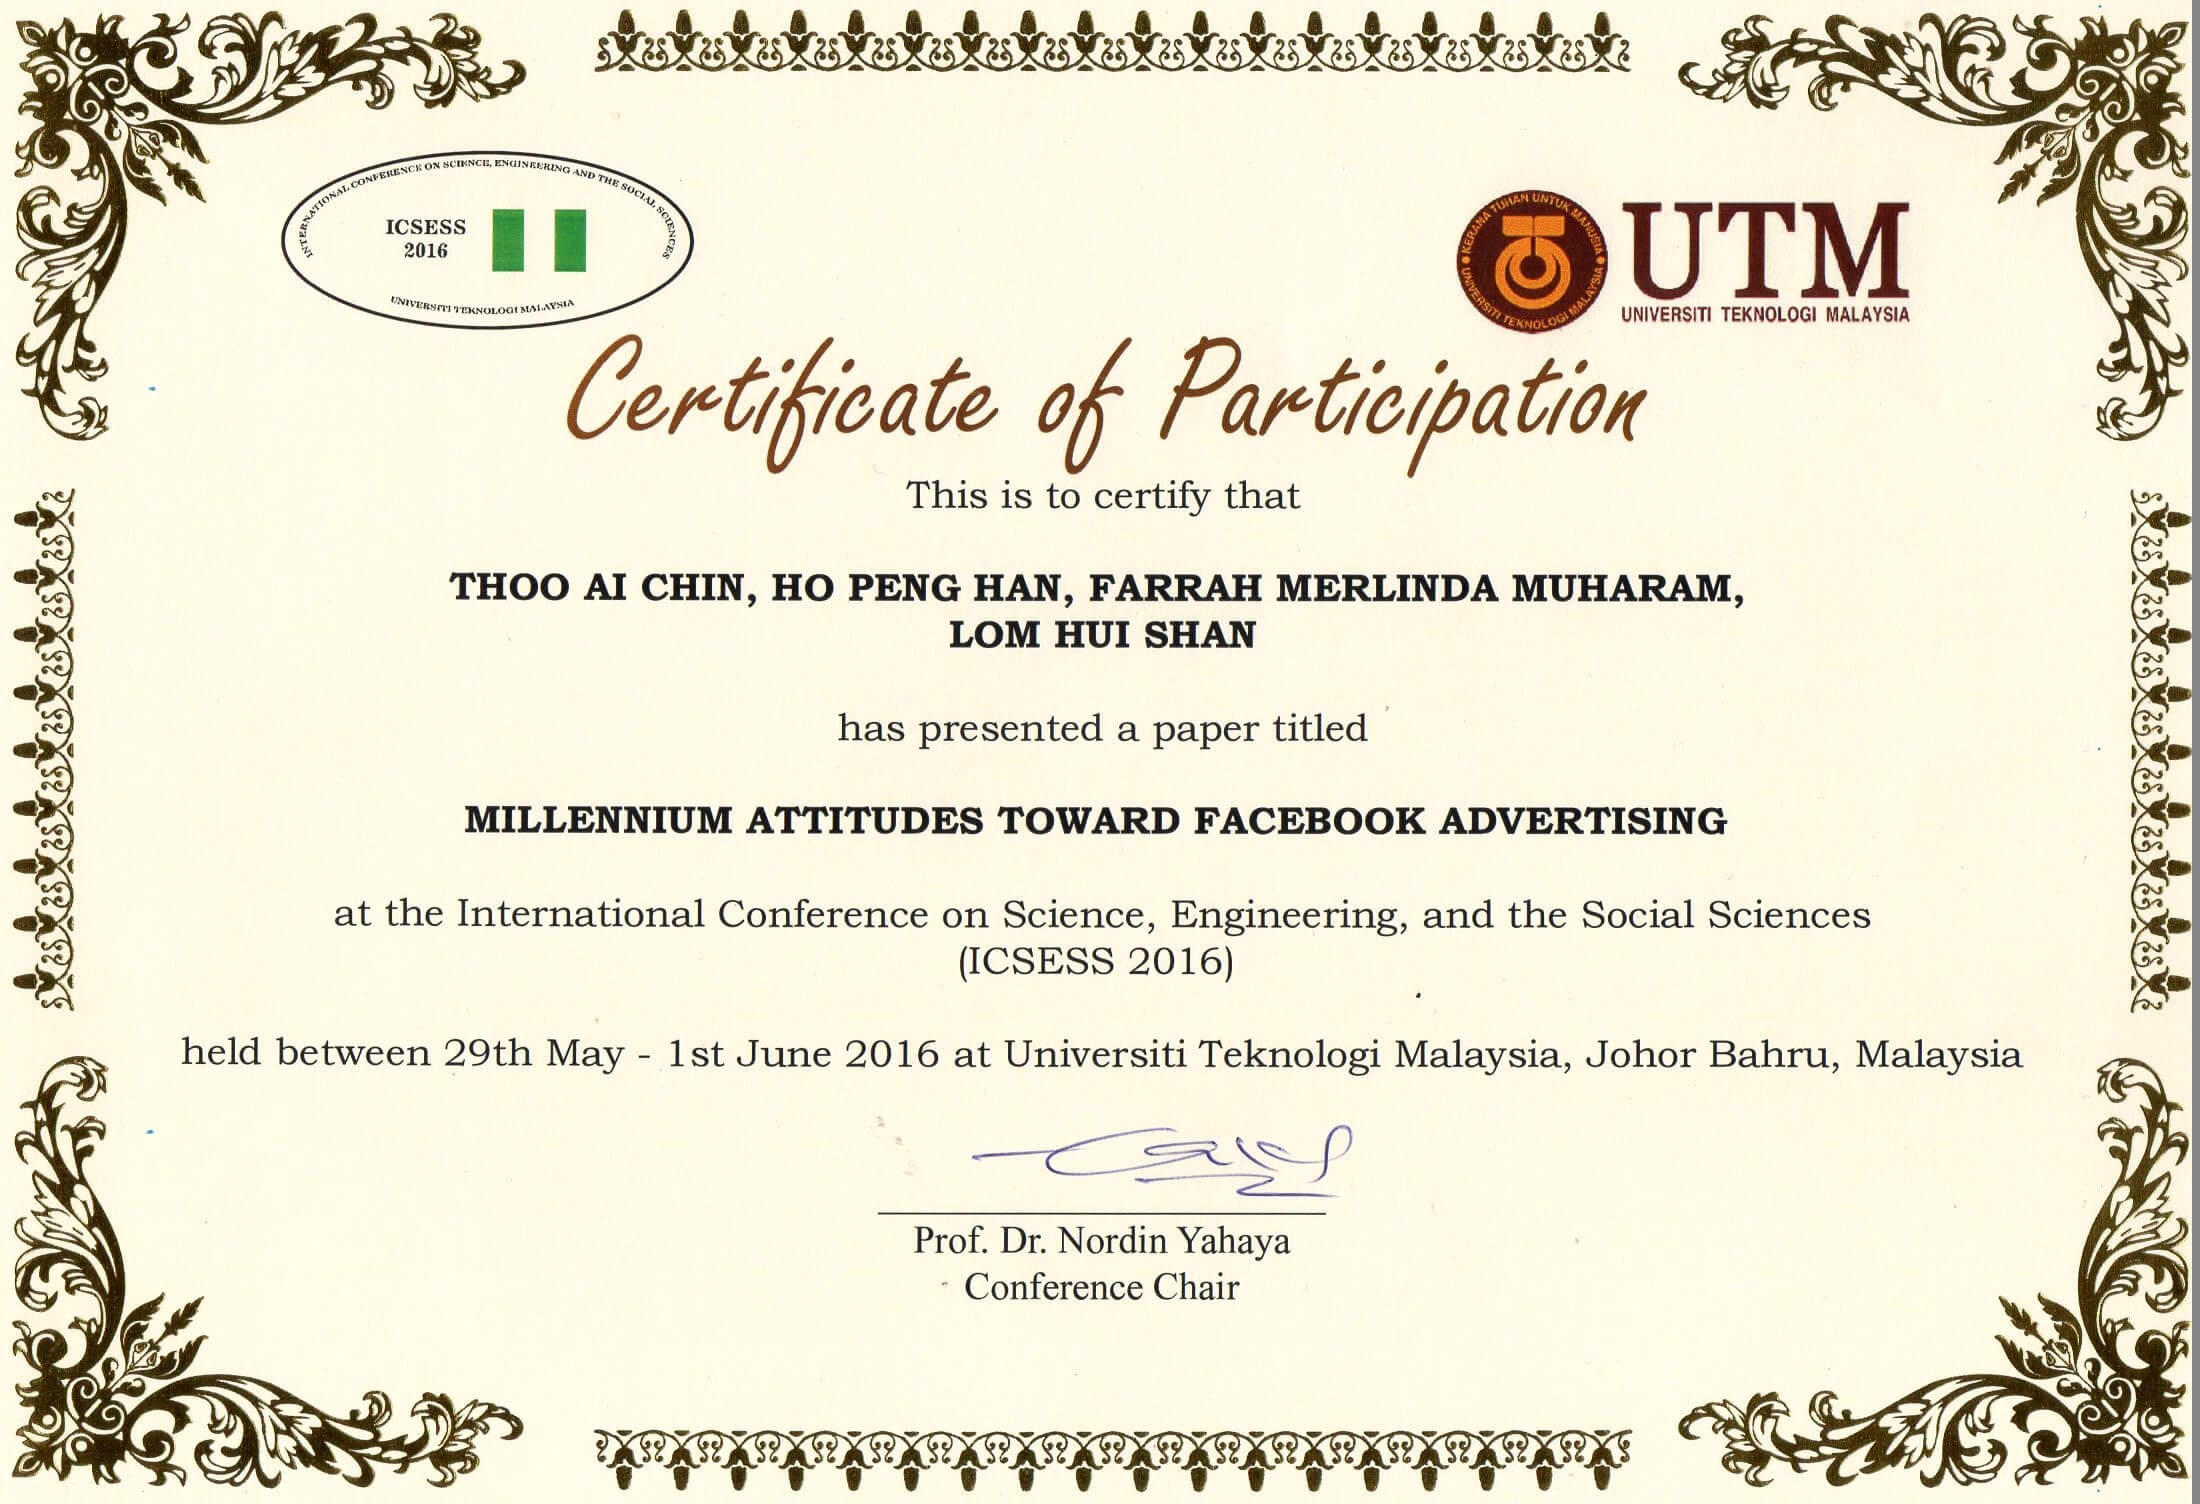 Conference Attendance Certificate Samples Fresh Template Within Conference Participation Certificate Template